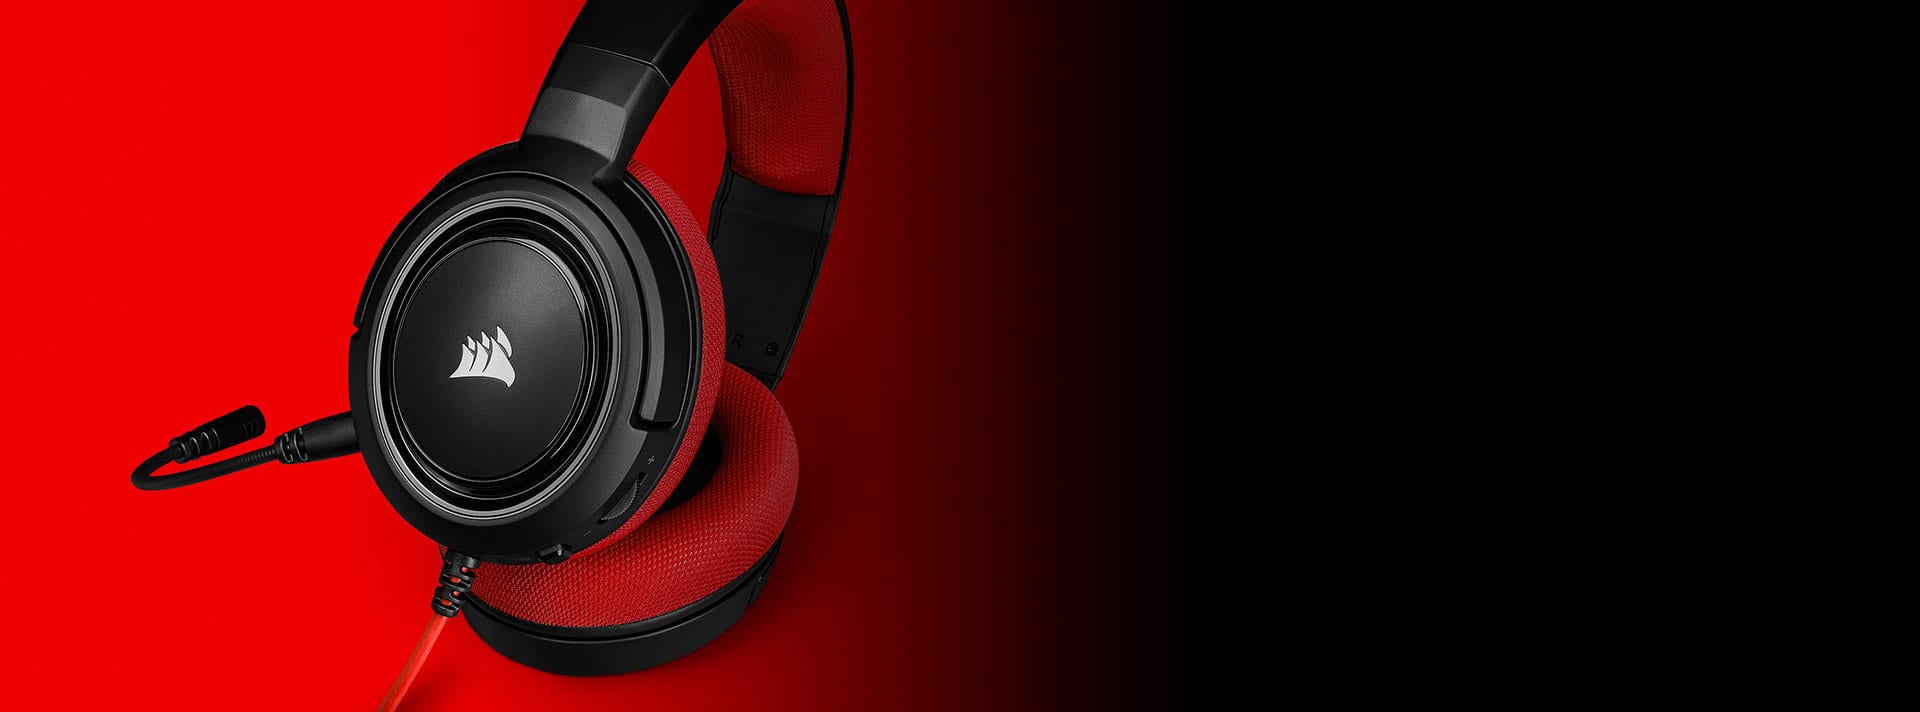 https://cwsmgmt.corsair.com/pdp/hs35/img/red/hs35_red_sonic_surround.jpg